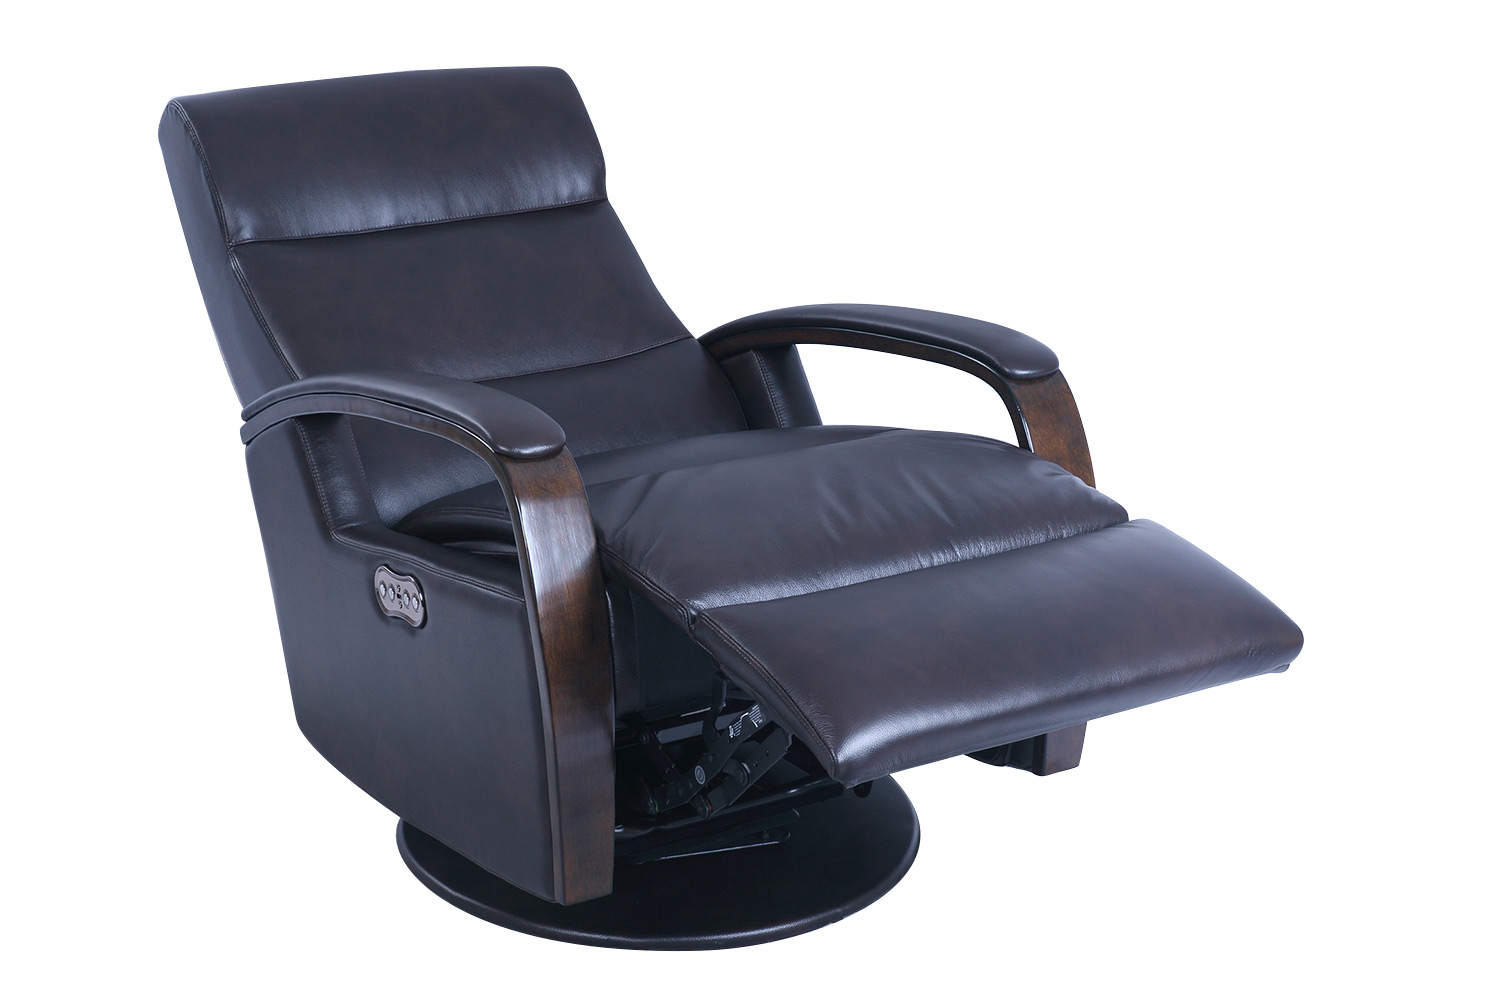 Barcalounger Carlos Swivel Glider Power Recliner Chair with Power Head Rest - Dobson Chocolate/Leather Match